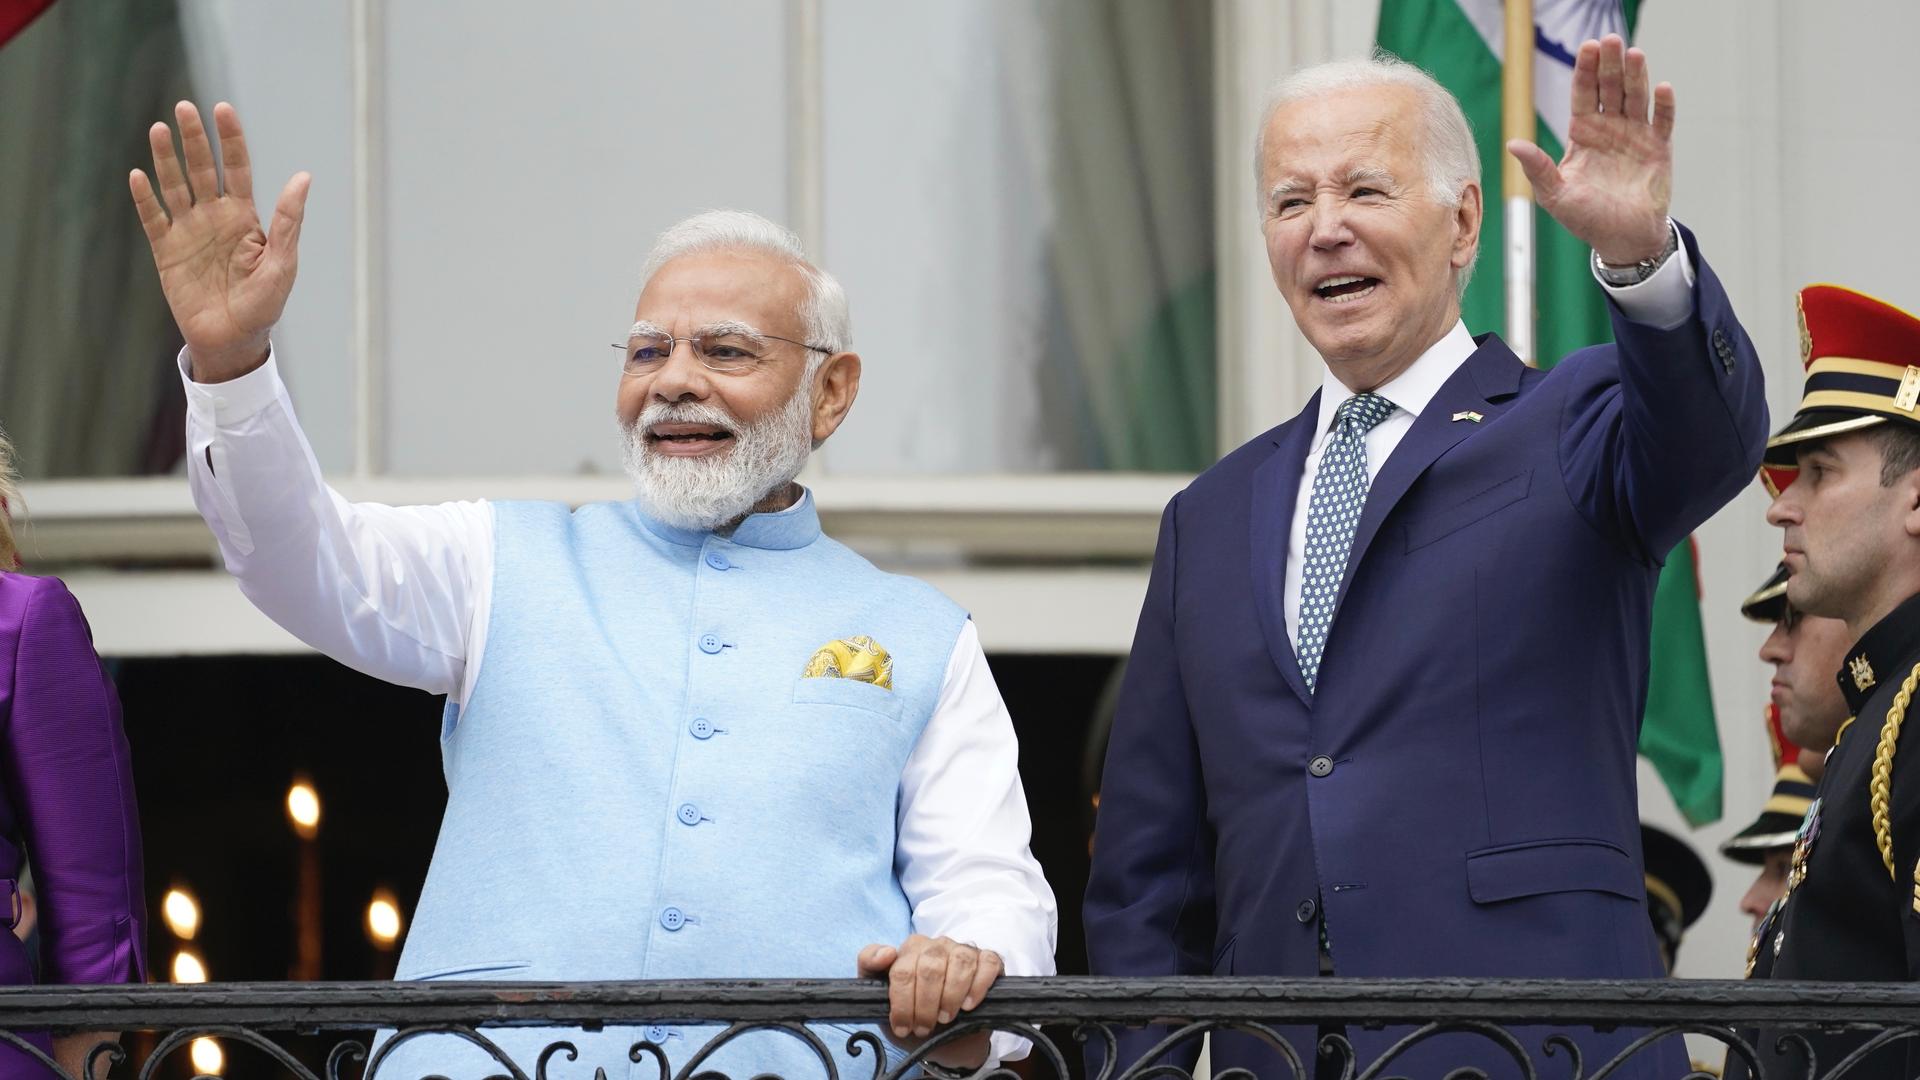 Two men, US President Biden and Indian Prime Minister Narendra Modi standing with the arms stretched outward to wave